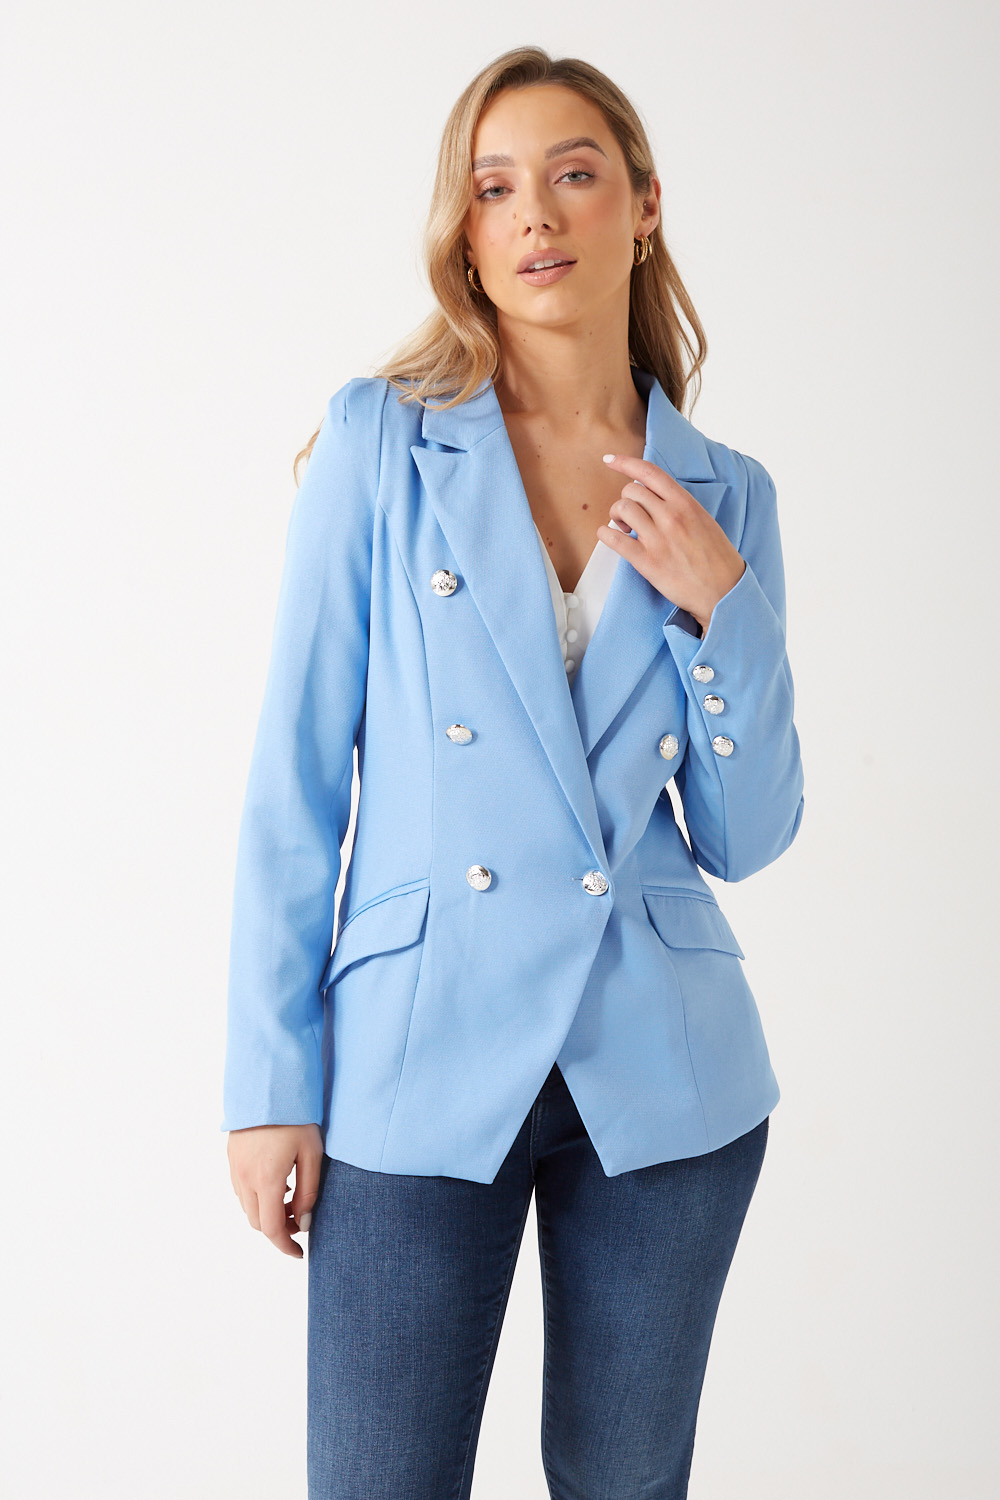 Marc Angelo Tess Military Blazer in Light Blue | iCLOTHING - iCLOTHING